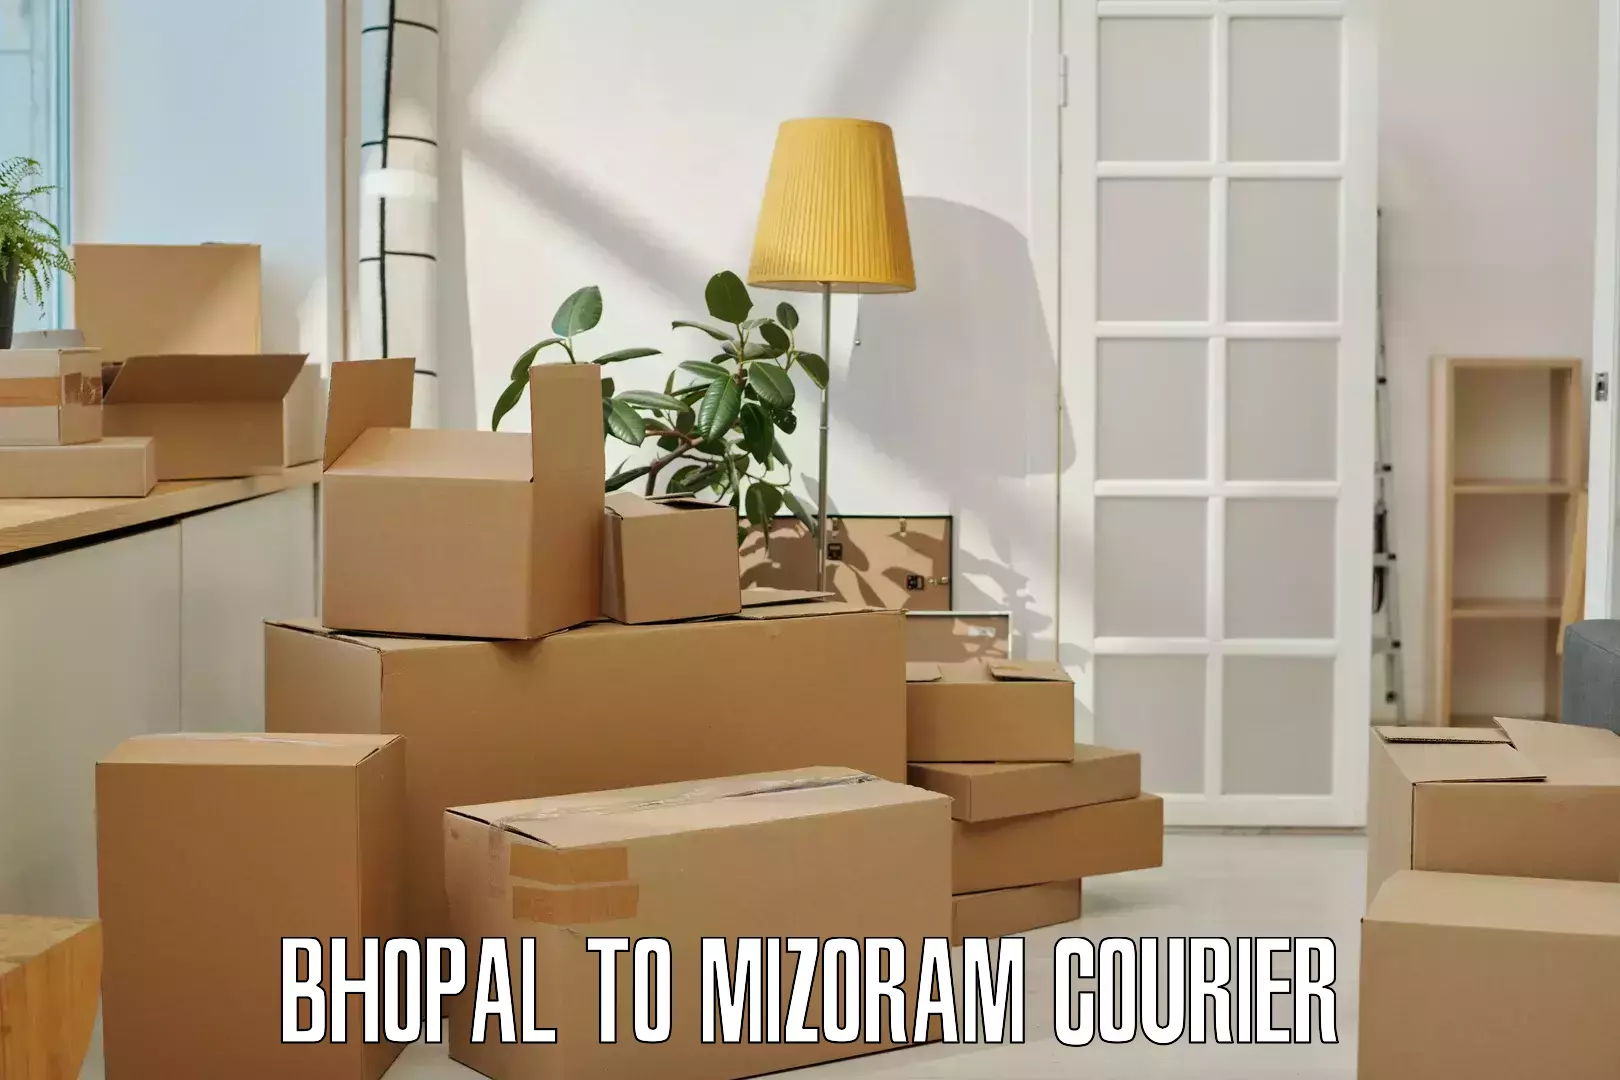 Reliable delivery network Bhopal to Mizoram